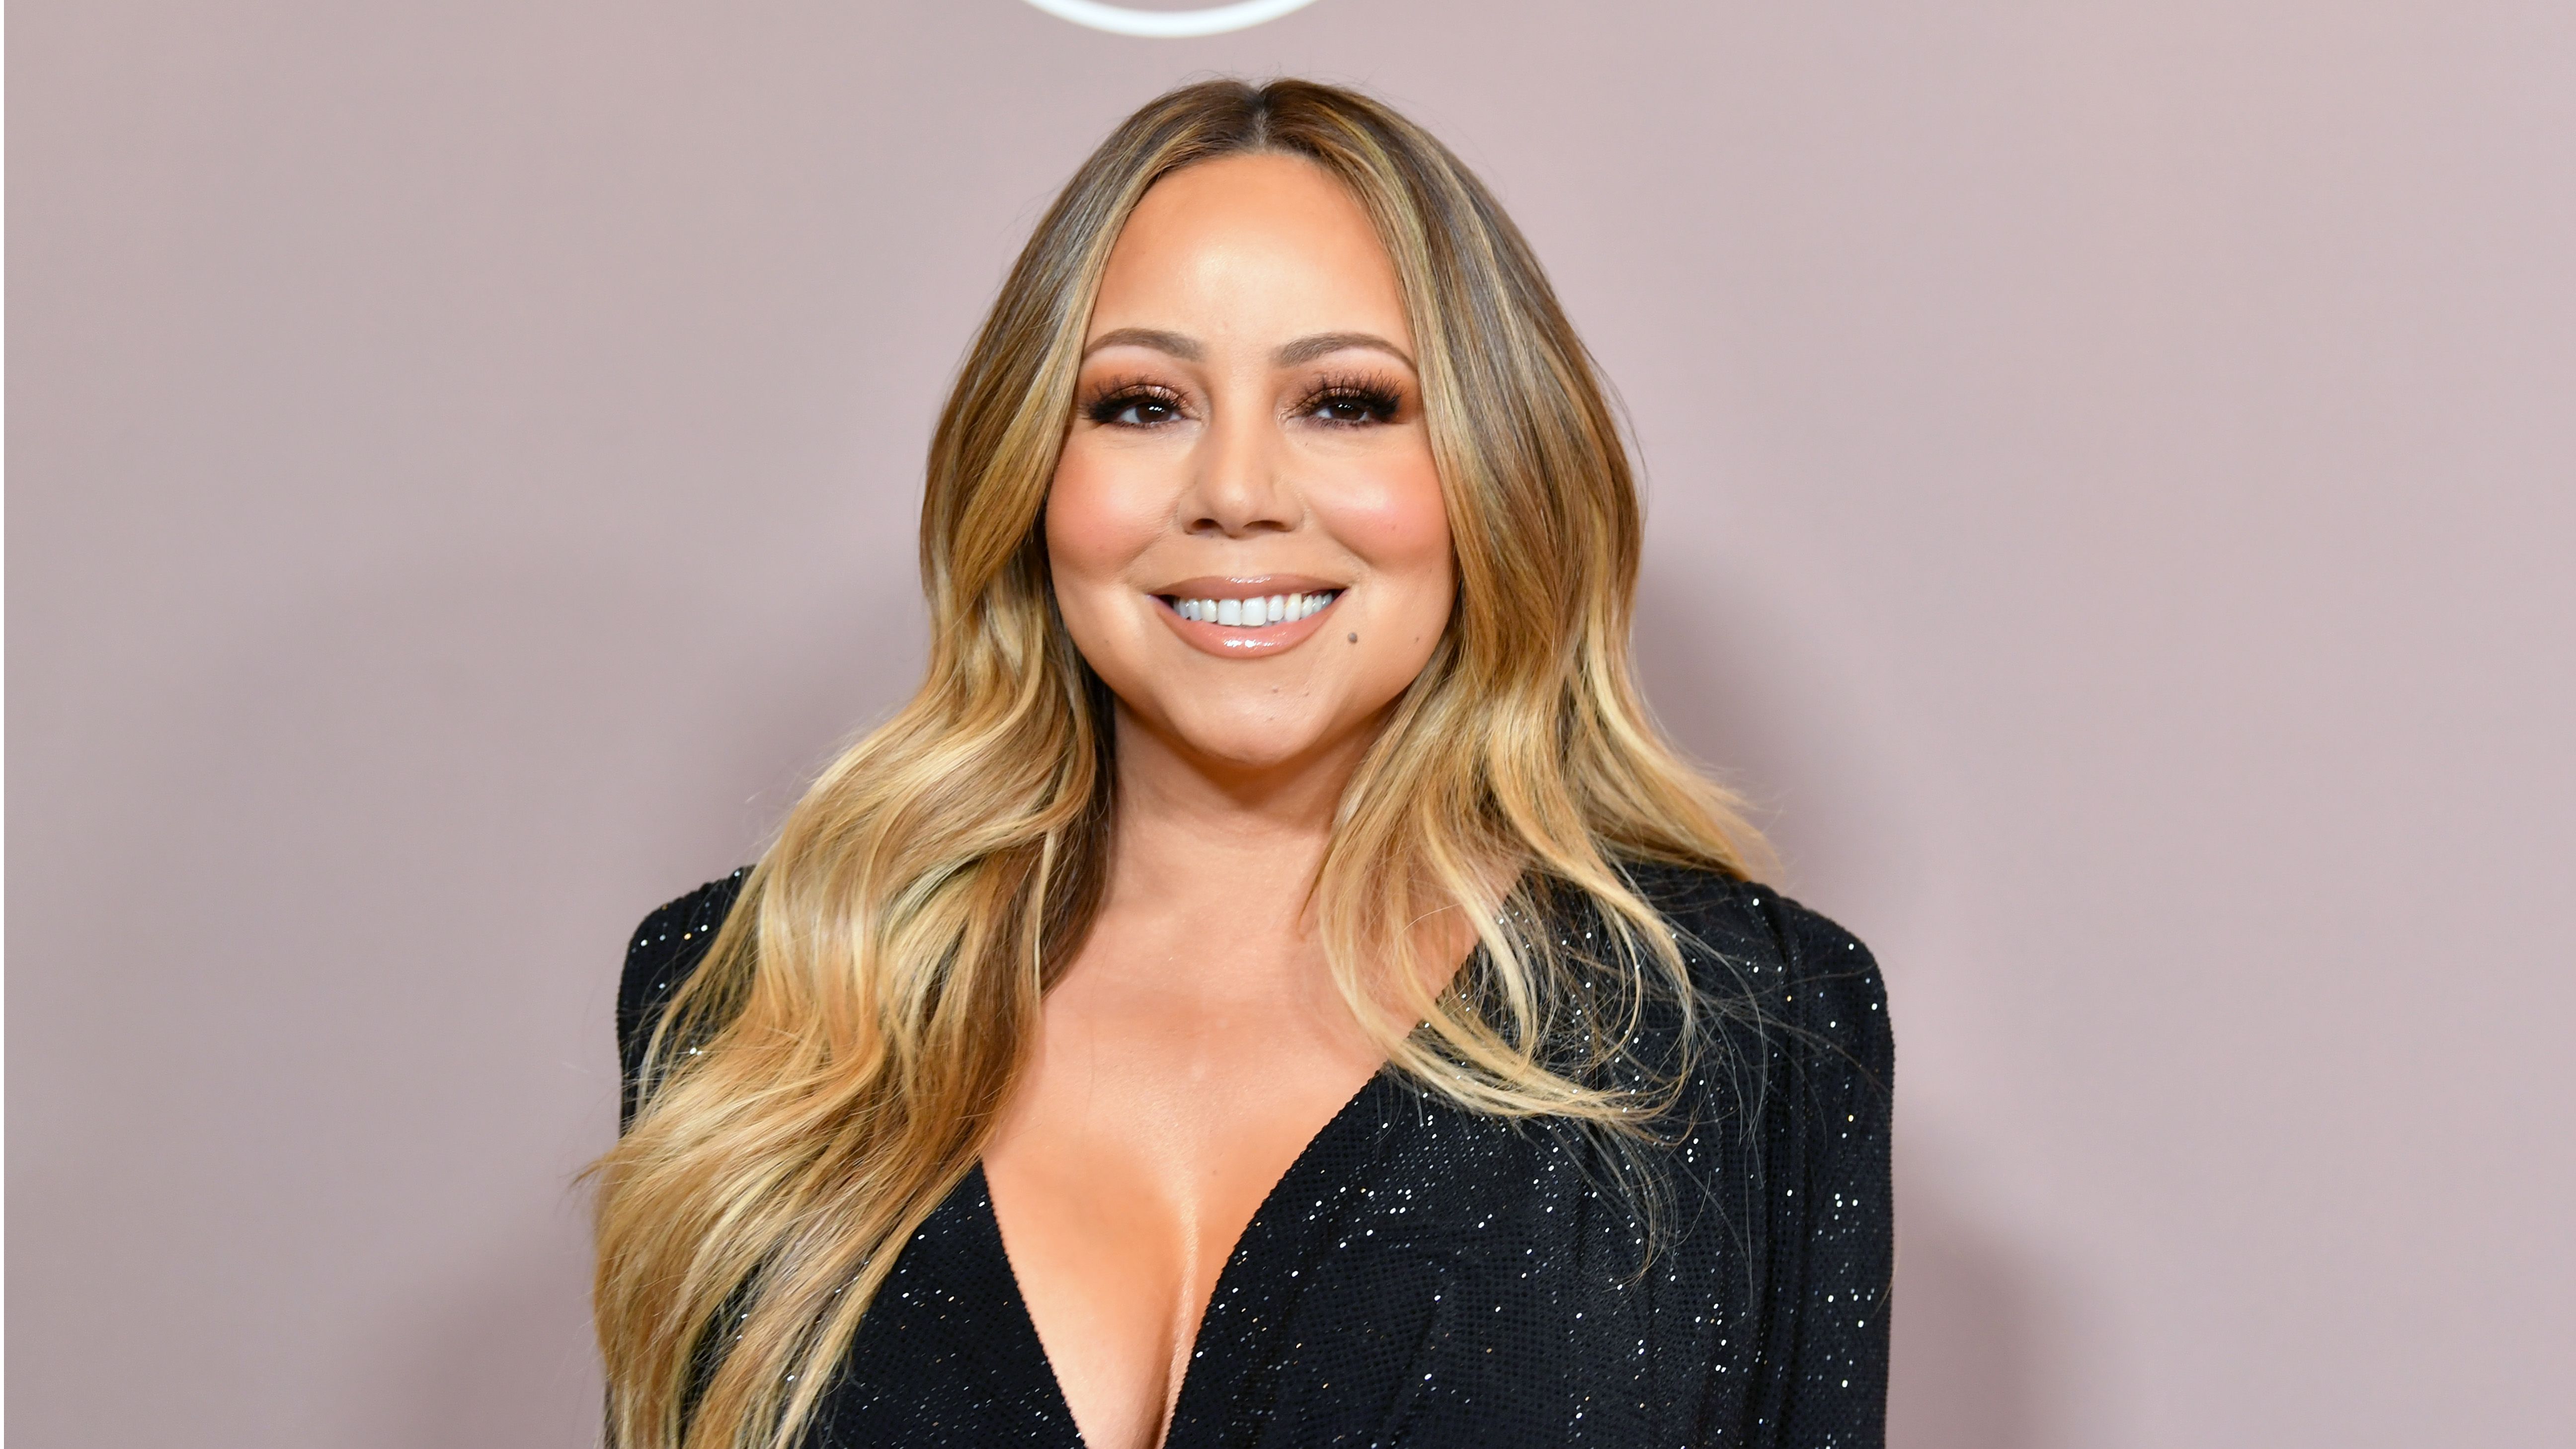 Mariah Carey takes to the stage in terribly tight leggings